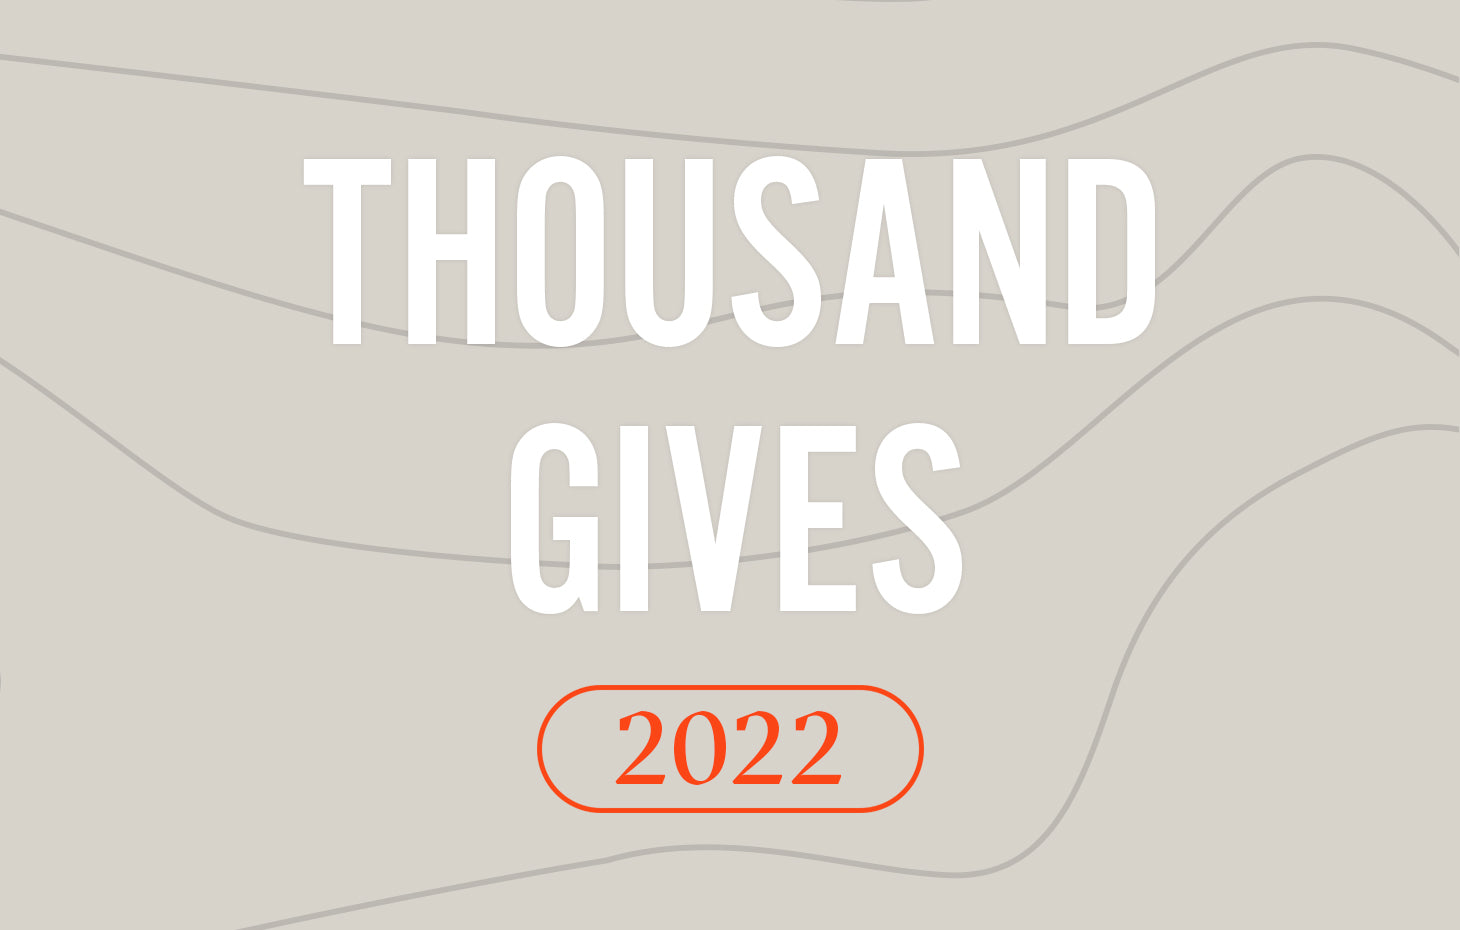 THOUSAND GIVES 2022